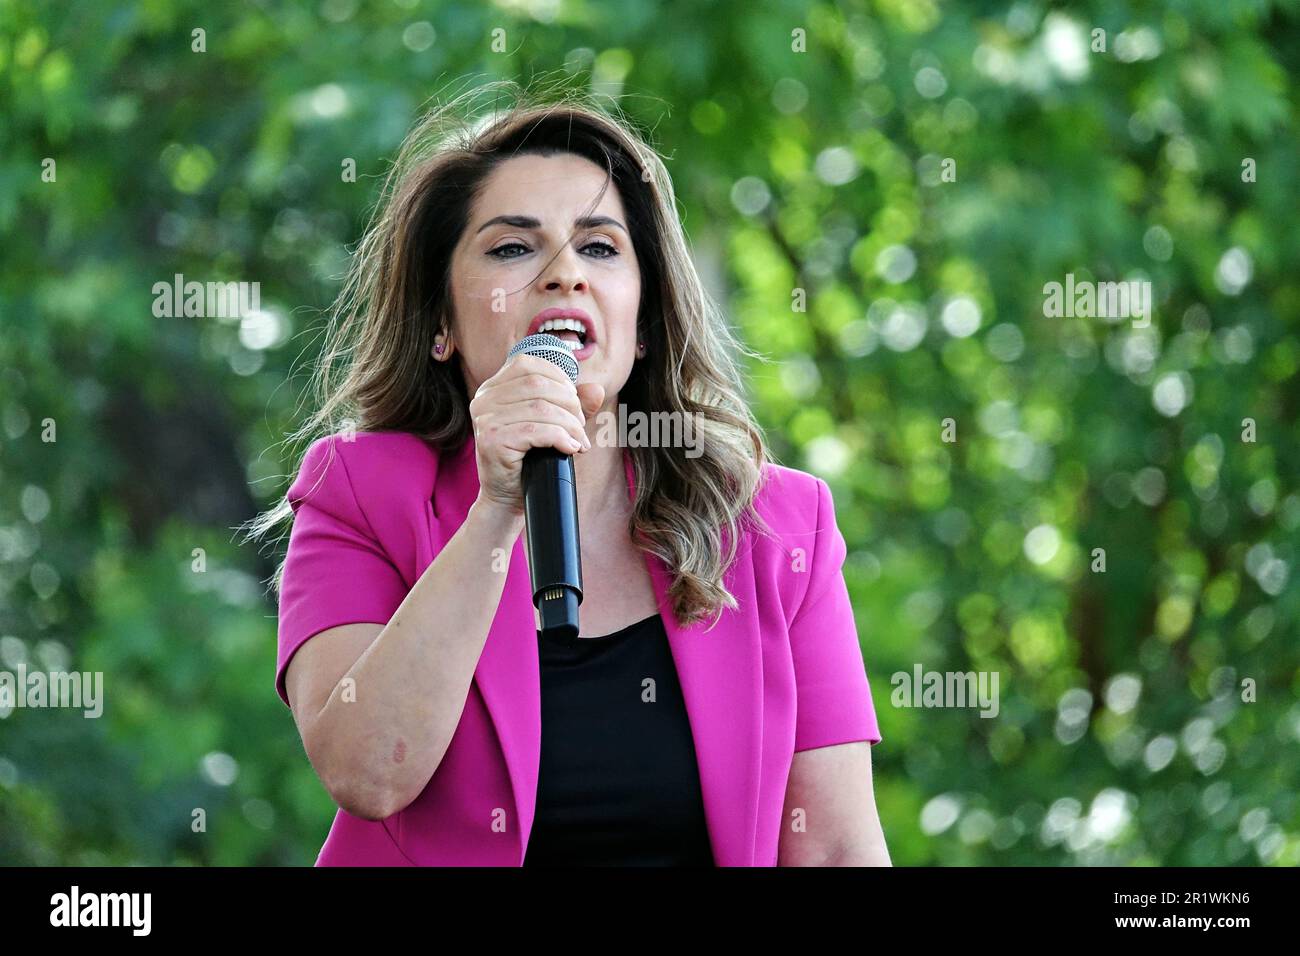 Diyarbakir, Turkey. 13th May, 2023. Basak Demirtas is seen speaking at the Green Left Party's Diyarbakir rally. Basak Demirtas, the wife of Selahattin Demirtas, the former Co-Leader of the Peoples' Democratic Party (HDP), who has been held in prison in Turkey for 7 years, also made a speech by attending a rally organized by the Green Left Party (YSP) in Diyarbakir. (Photo by Mehmet Masum Suer/SOPA Images/Sipa USA) Credit: Sipa USA/Alamy Live News Stock Photo